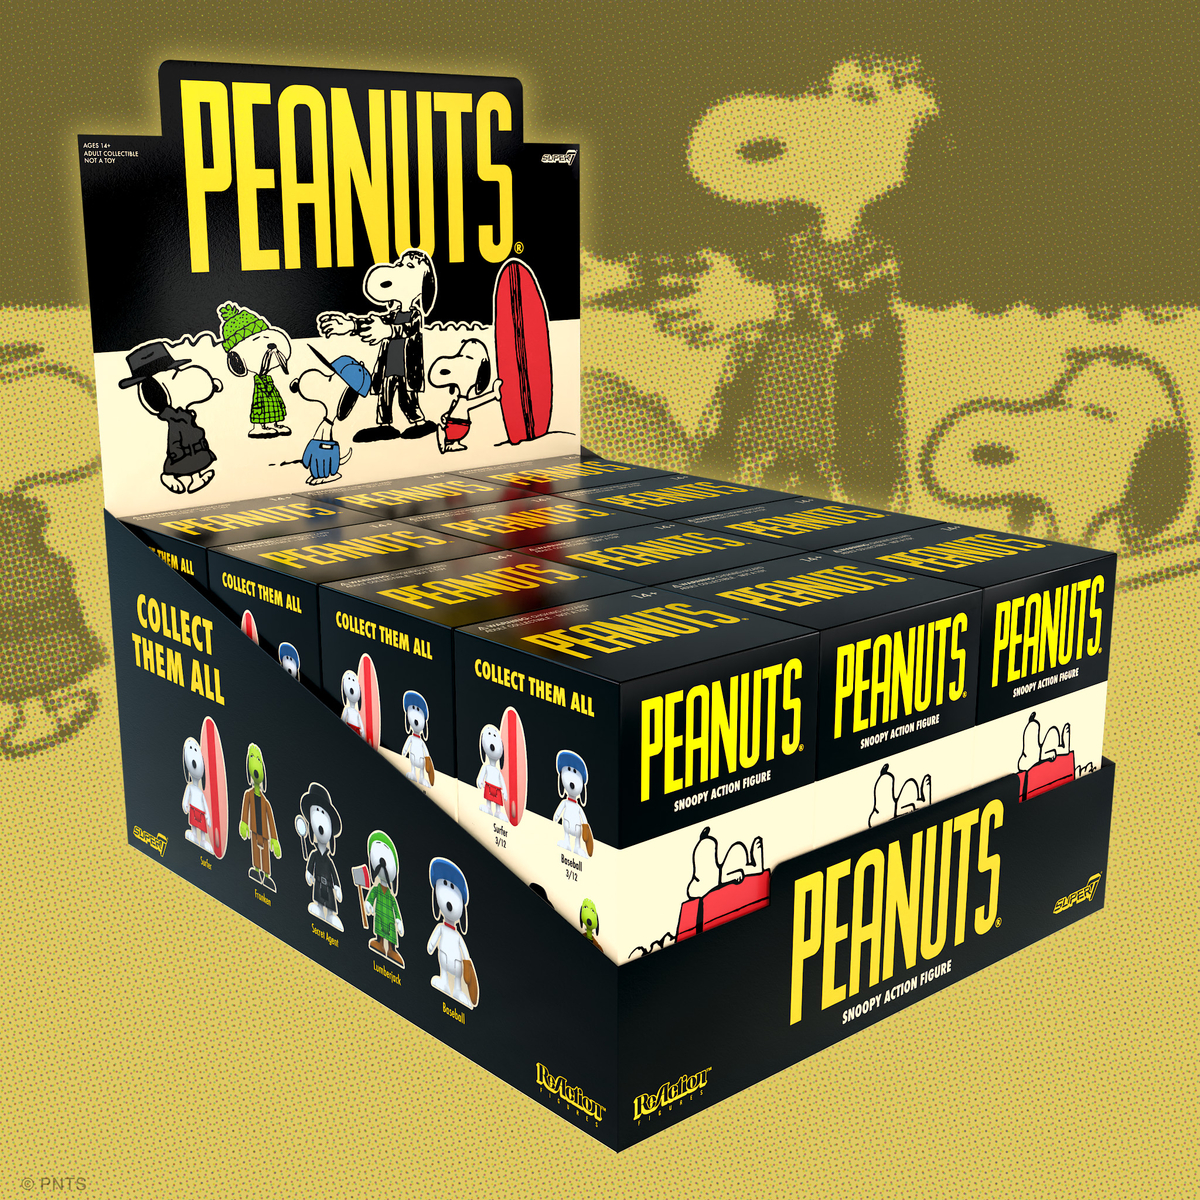 These Peanuts Blind Box ReAction Figures feature one of five memorable Snoopy designs- Baseball, Lumberjack, Secret Agent, Surfer, and Franken Snoopy- secreted in blind-box packaging ready for you to discover which variant hides inside! Shop now on Super7.com!